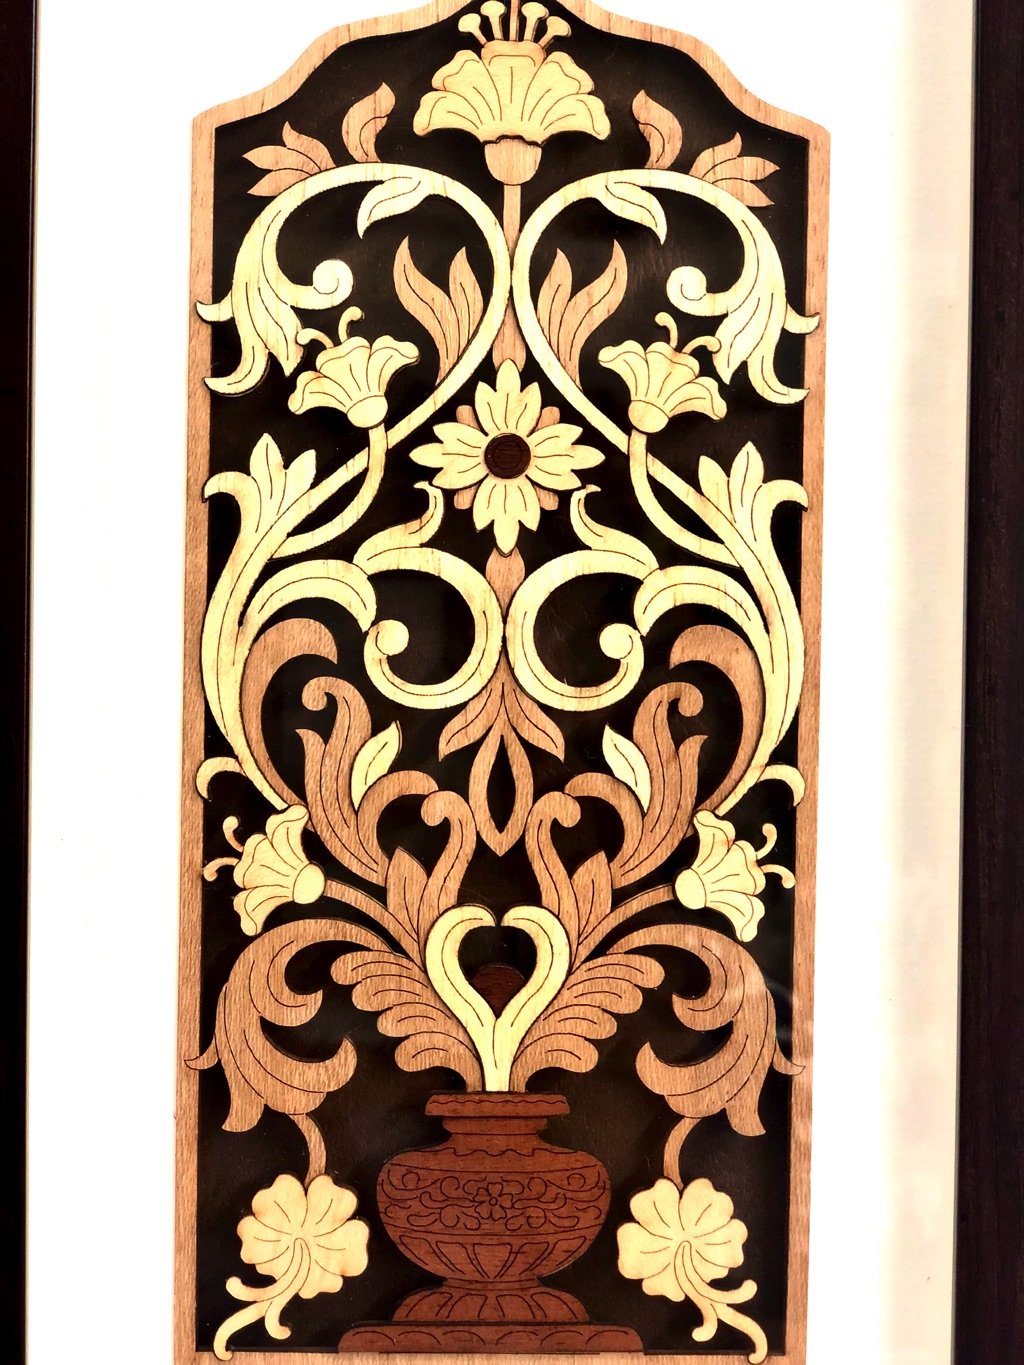 Classic Wooden Frame Depicts Flower With Vase Wall Hangings Now At Tamrapatra